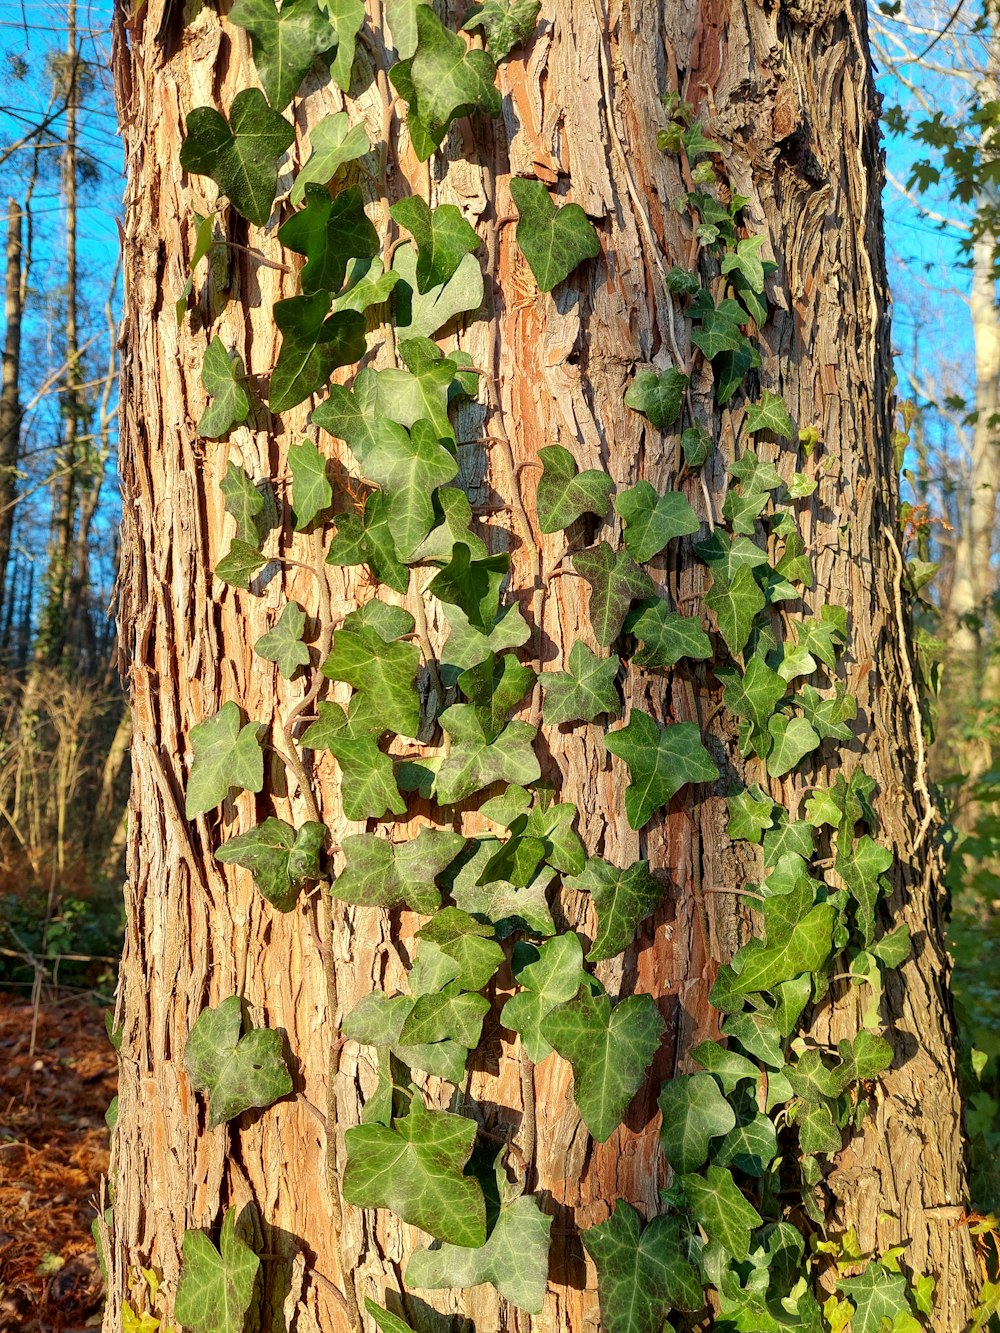 ivy growing on a tree trunk in the woods